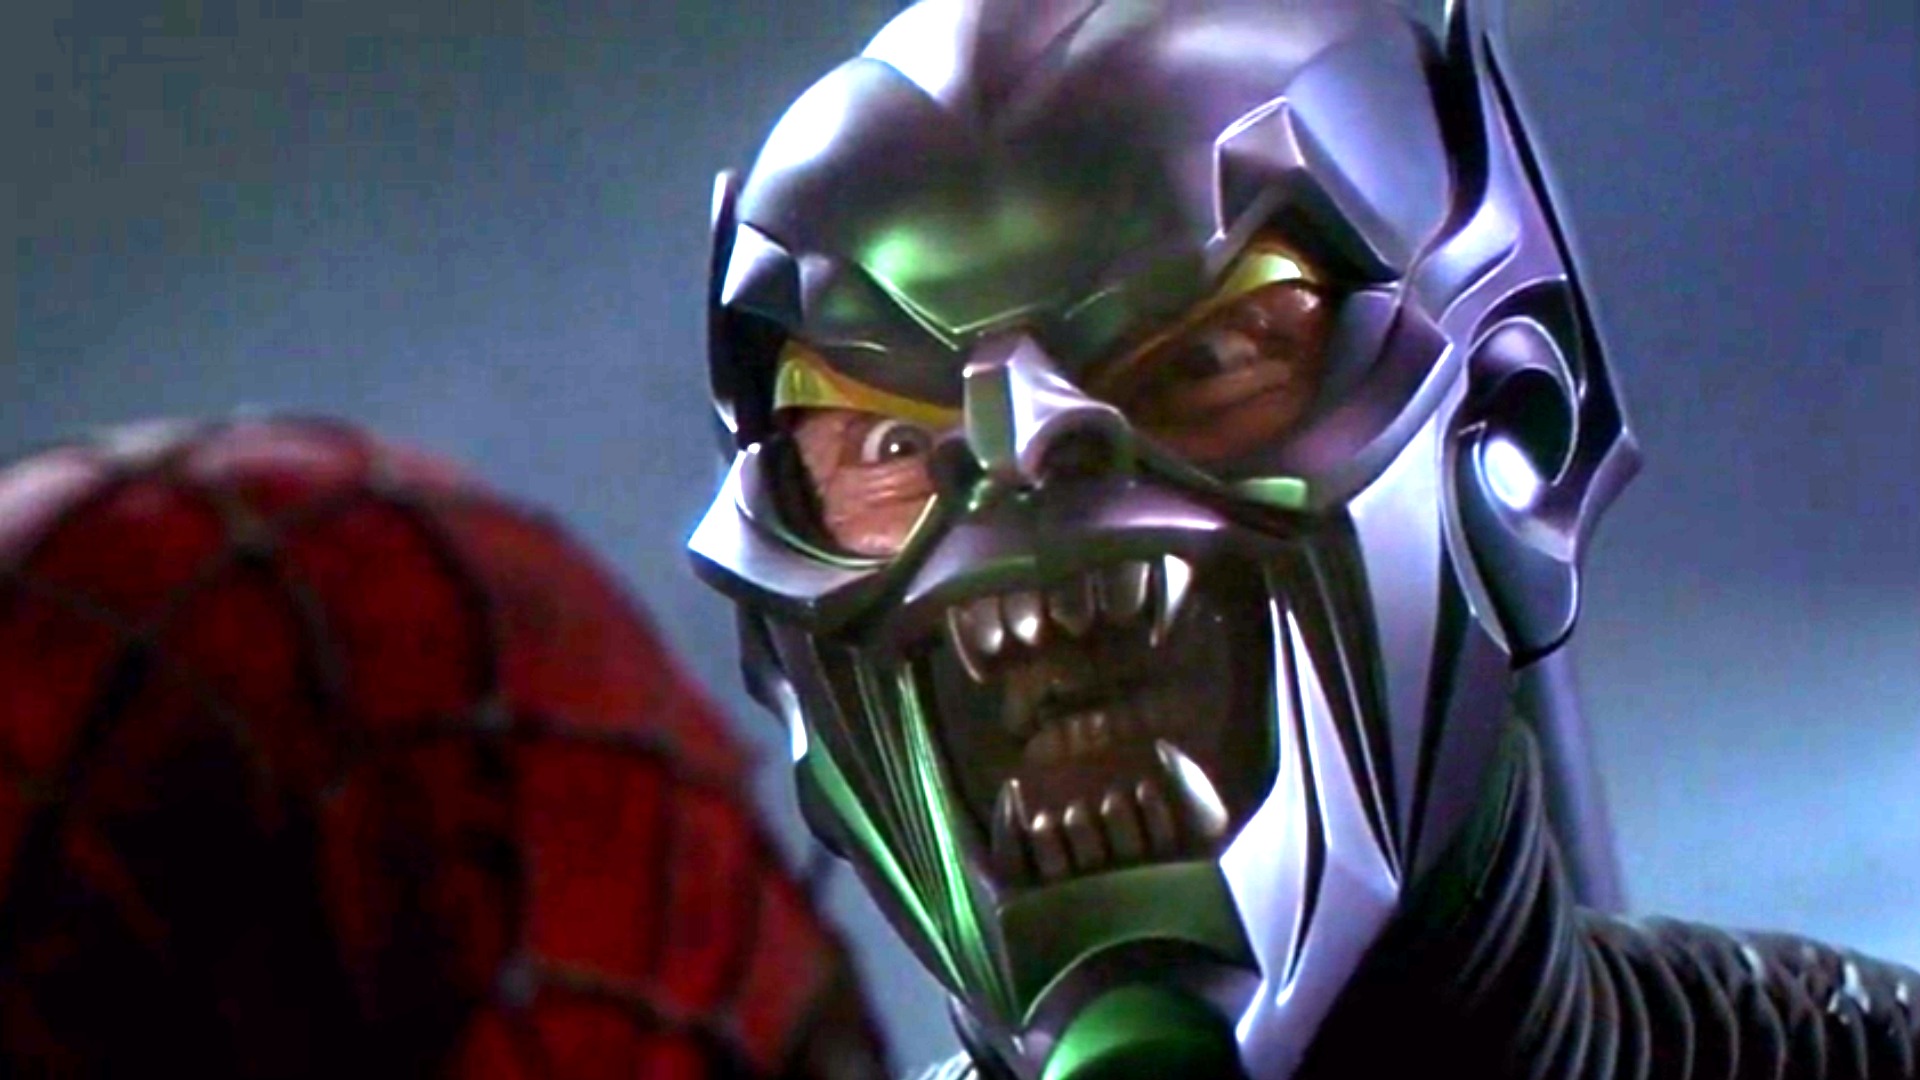 Spider-Man: Official Clip - Spider-Man vs. Green Goblin - Trailers & Videos  - Rotten Tomatoes